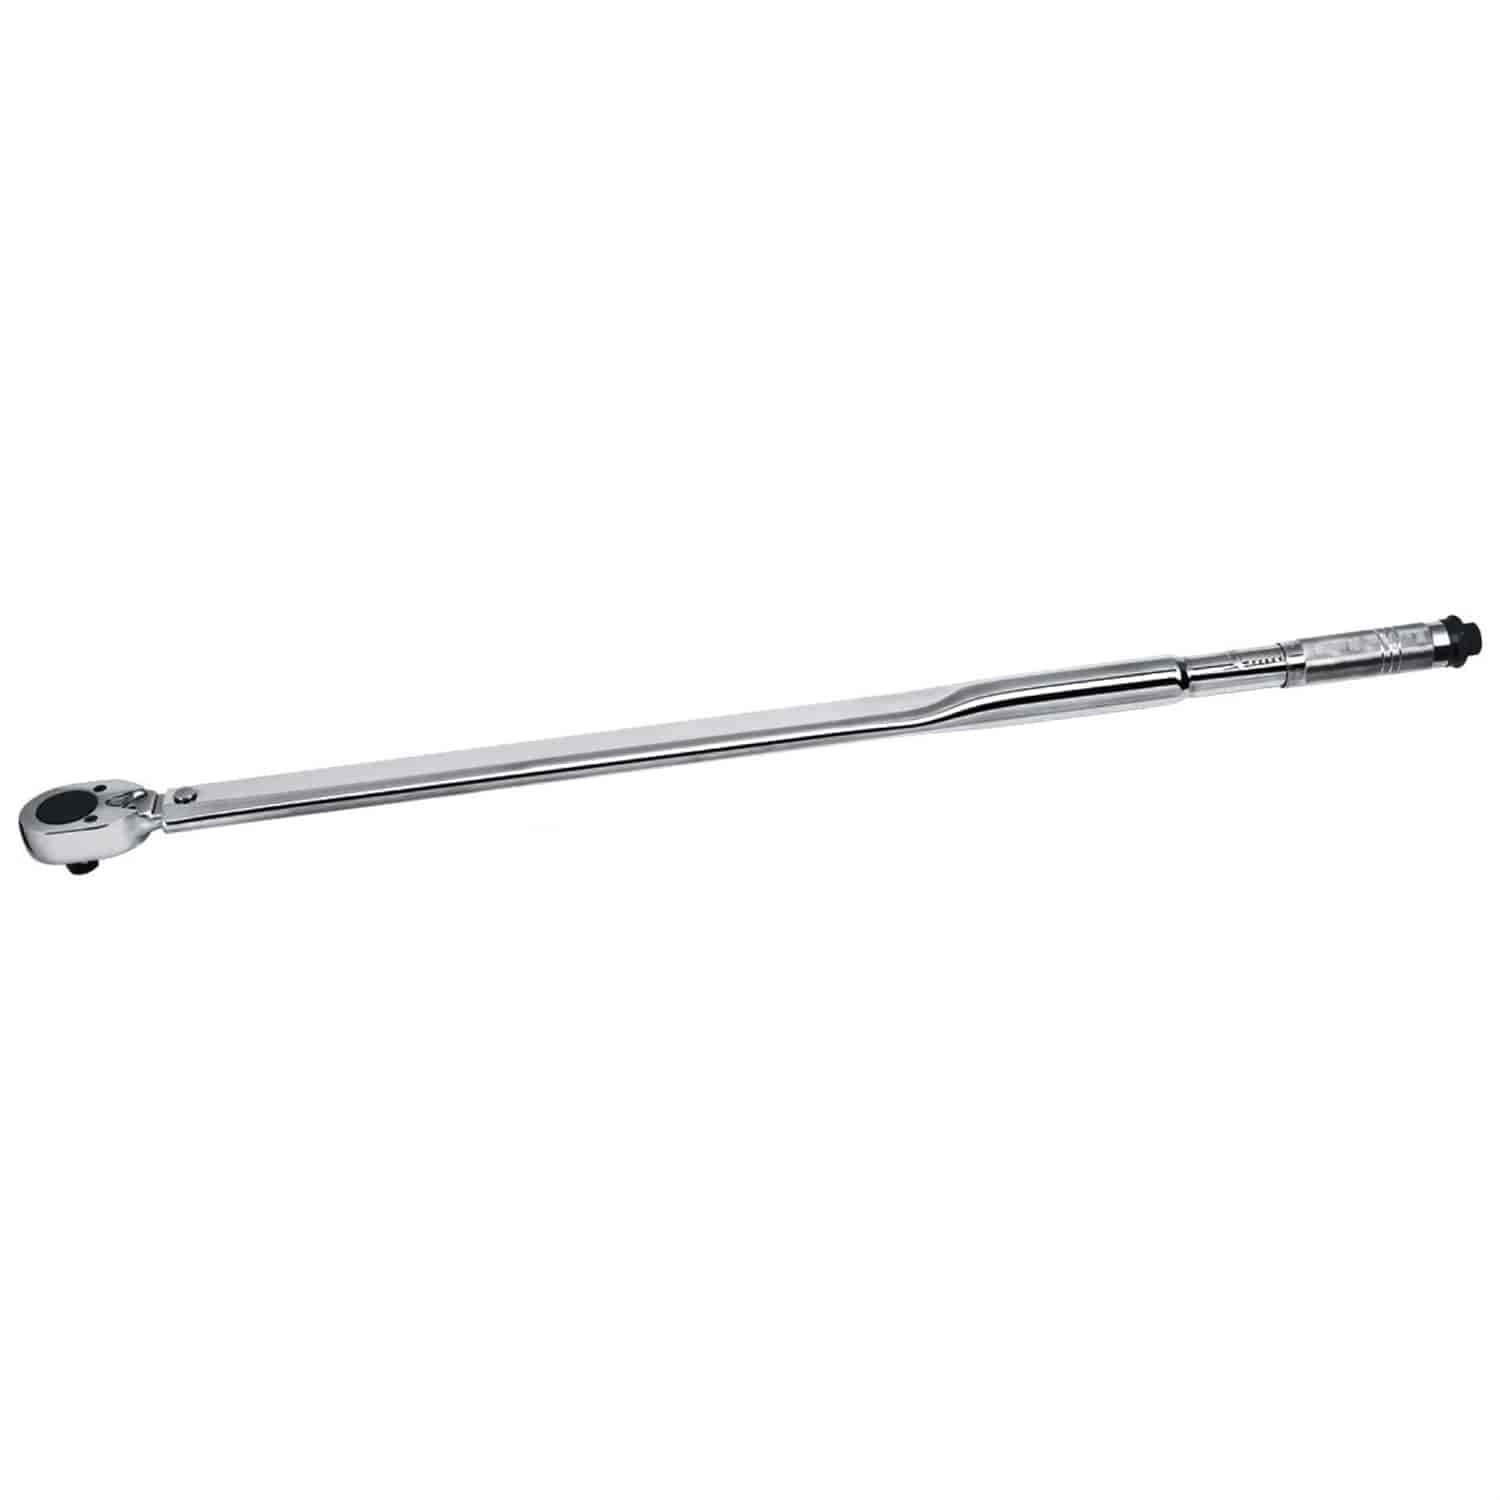 3/4 TORQUE WRENCH 600FTLB